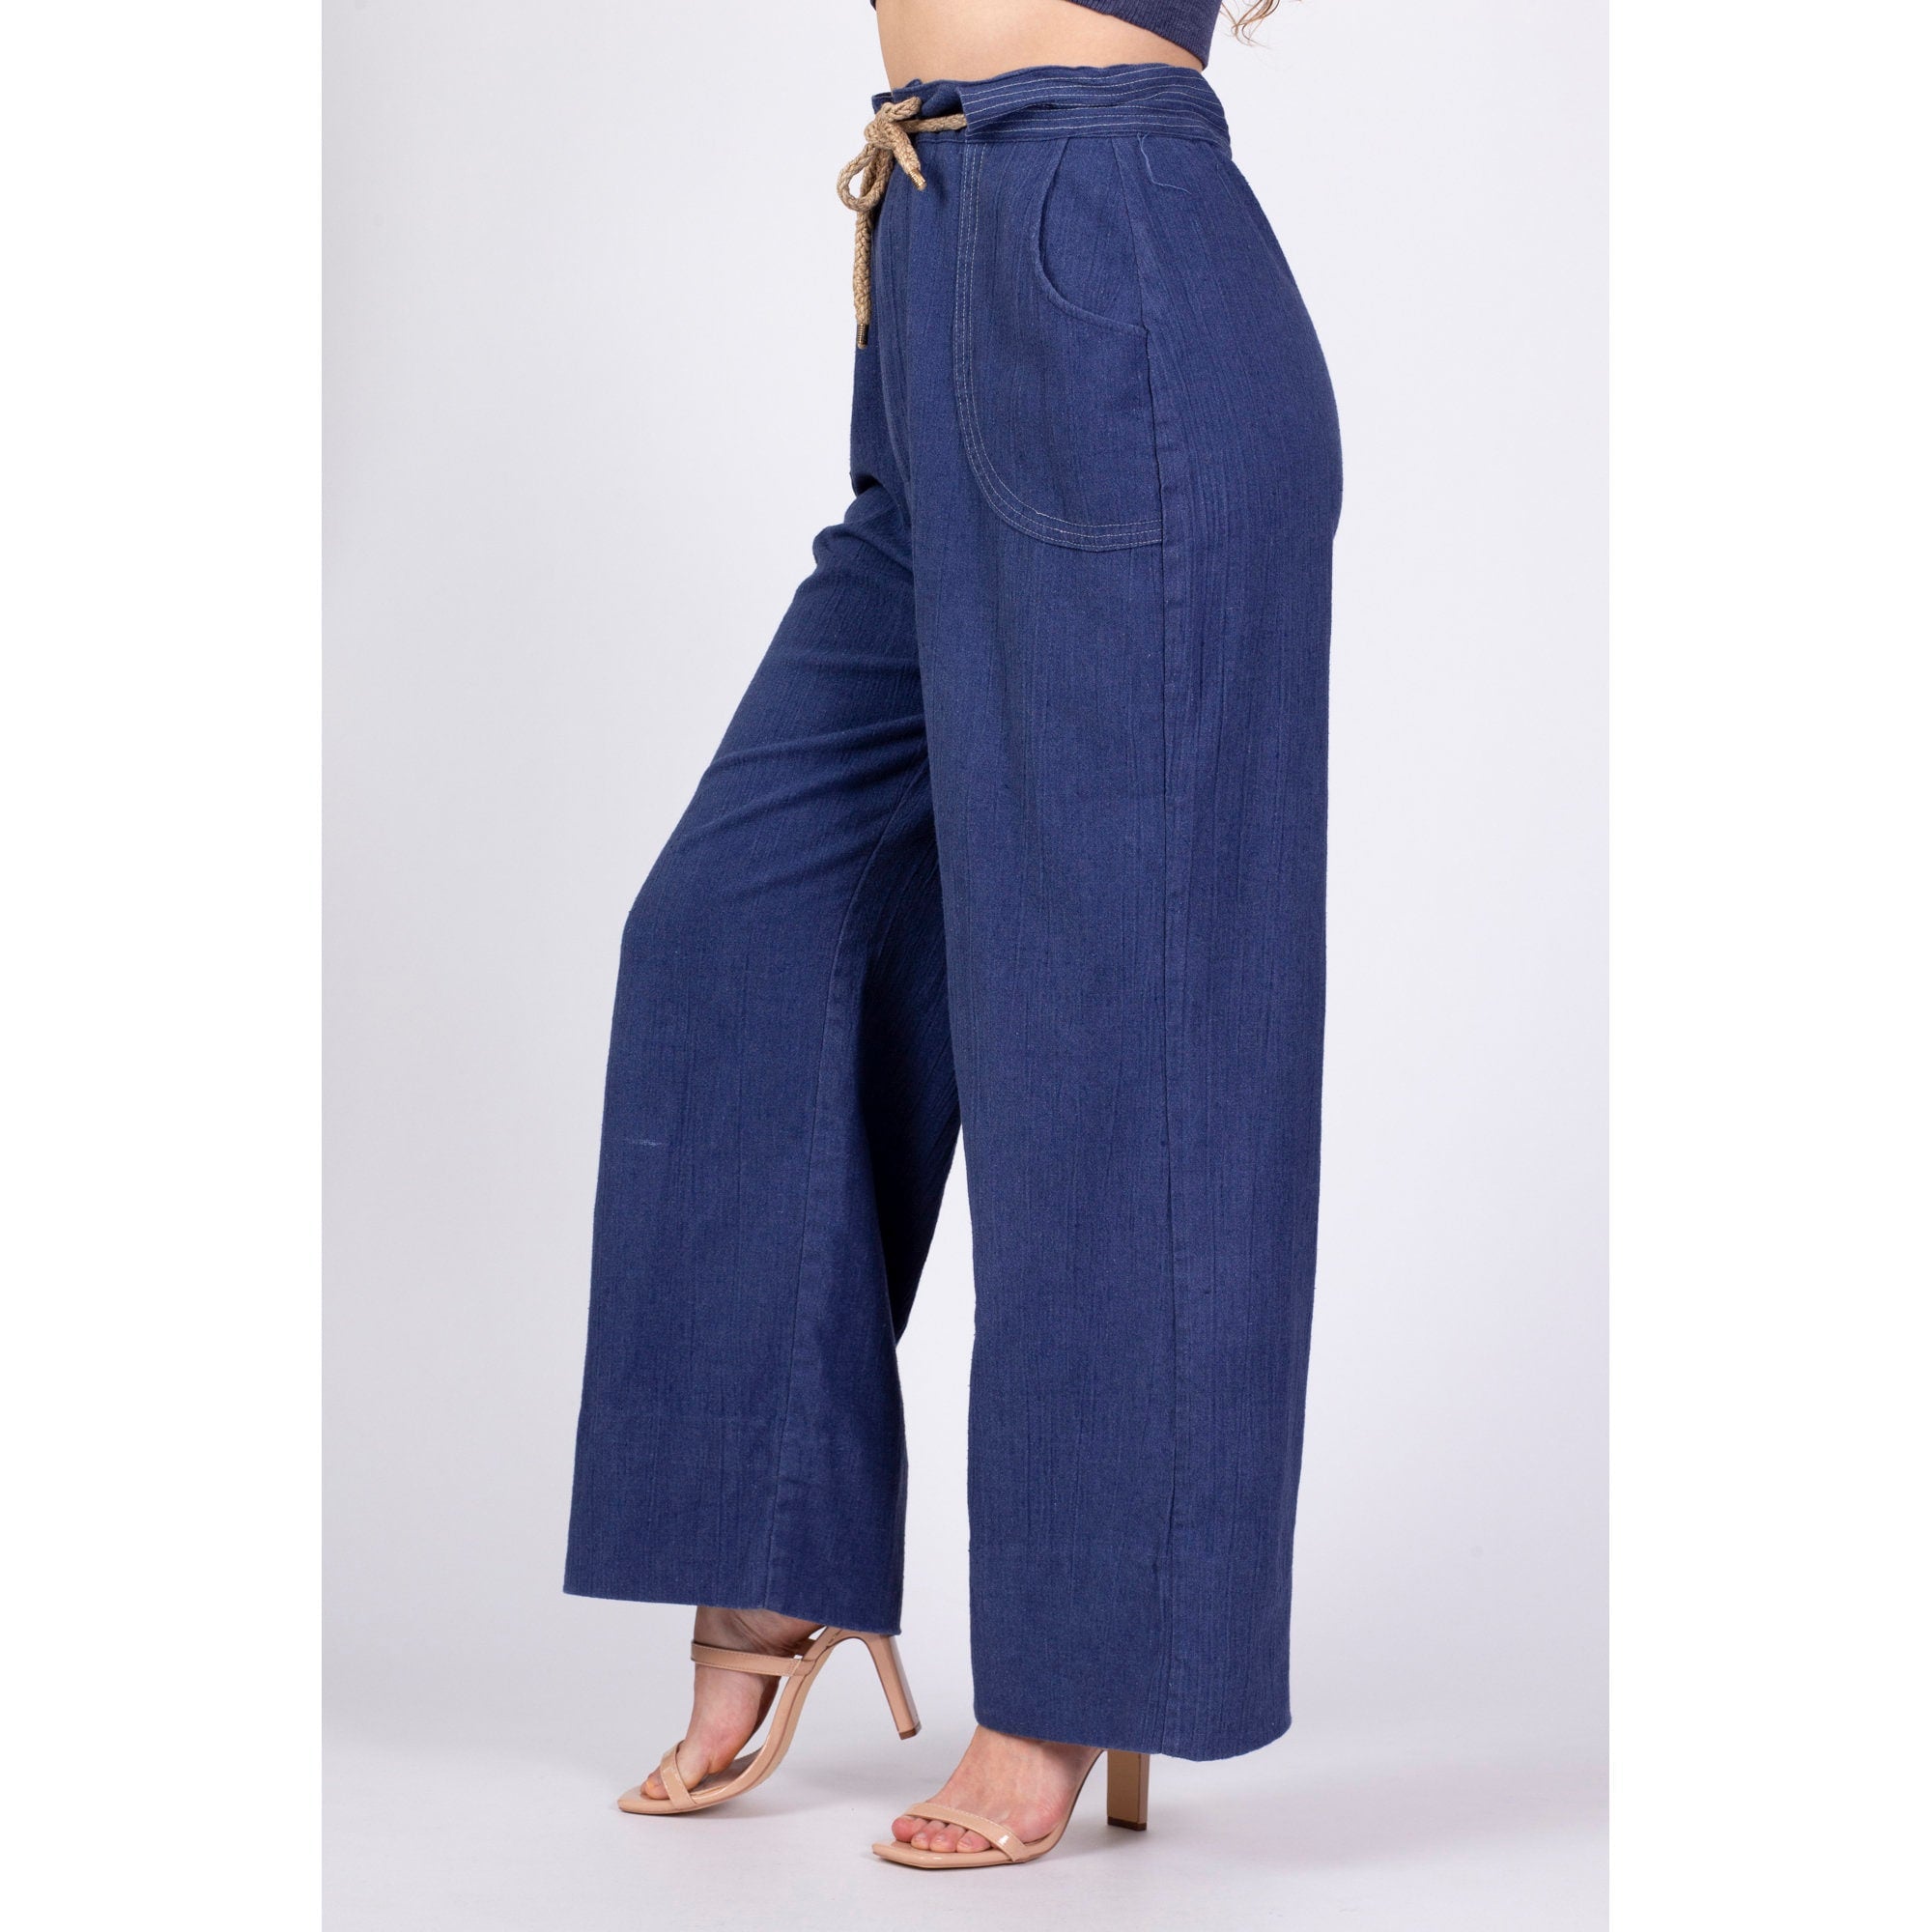 Straight Pants Jamsha Chambray Cotton Ladies Trousers, Waist Size: 28-36 at  Rs 300/piece in Jaipur